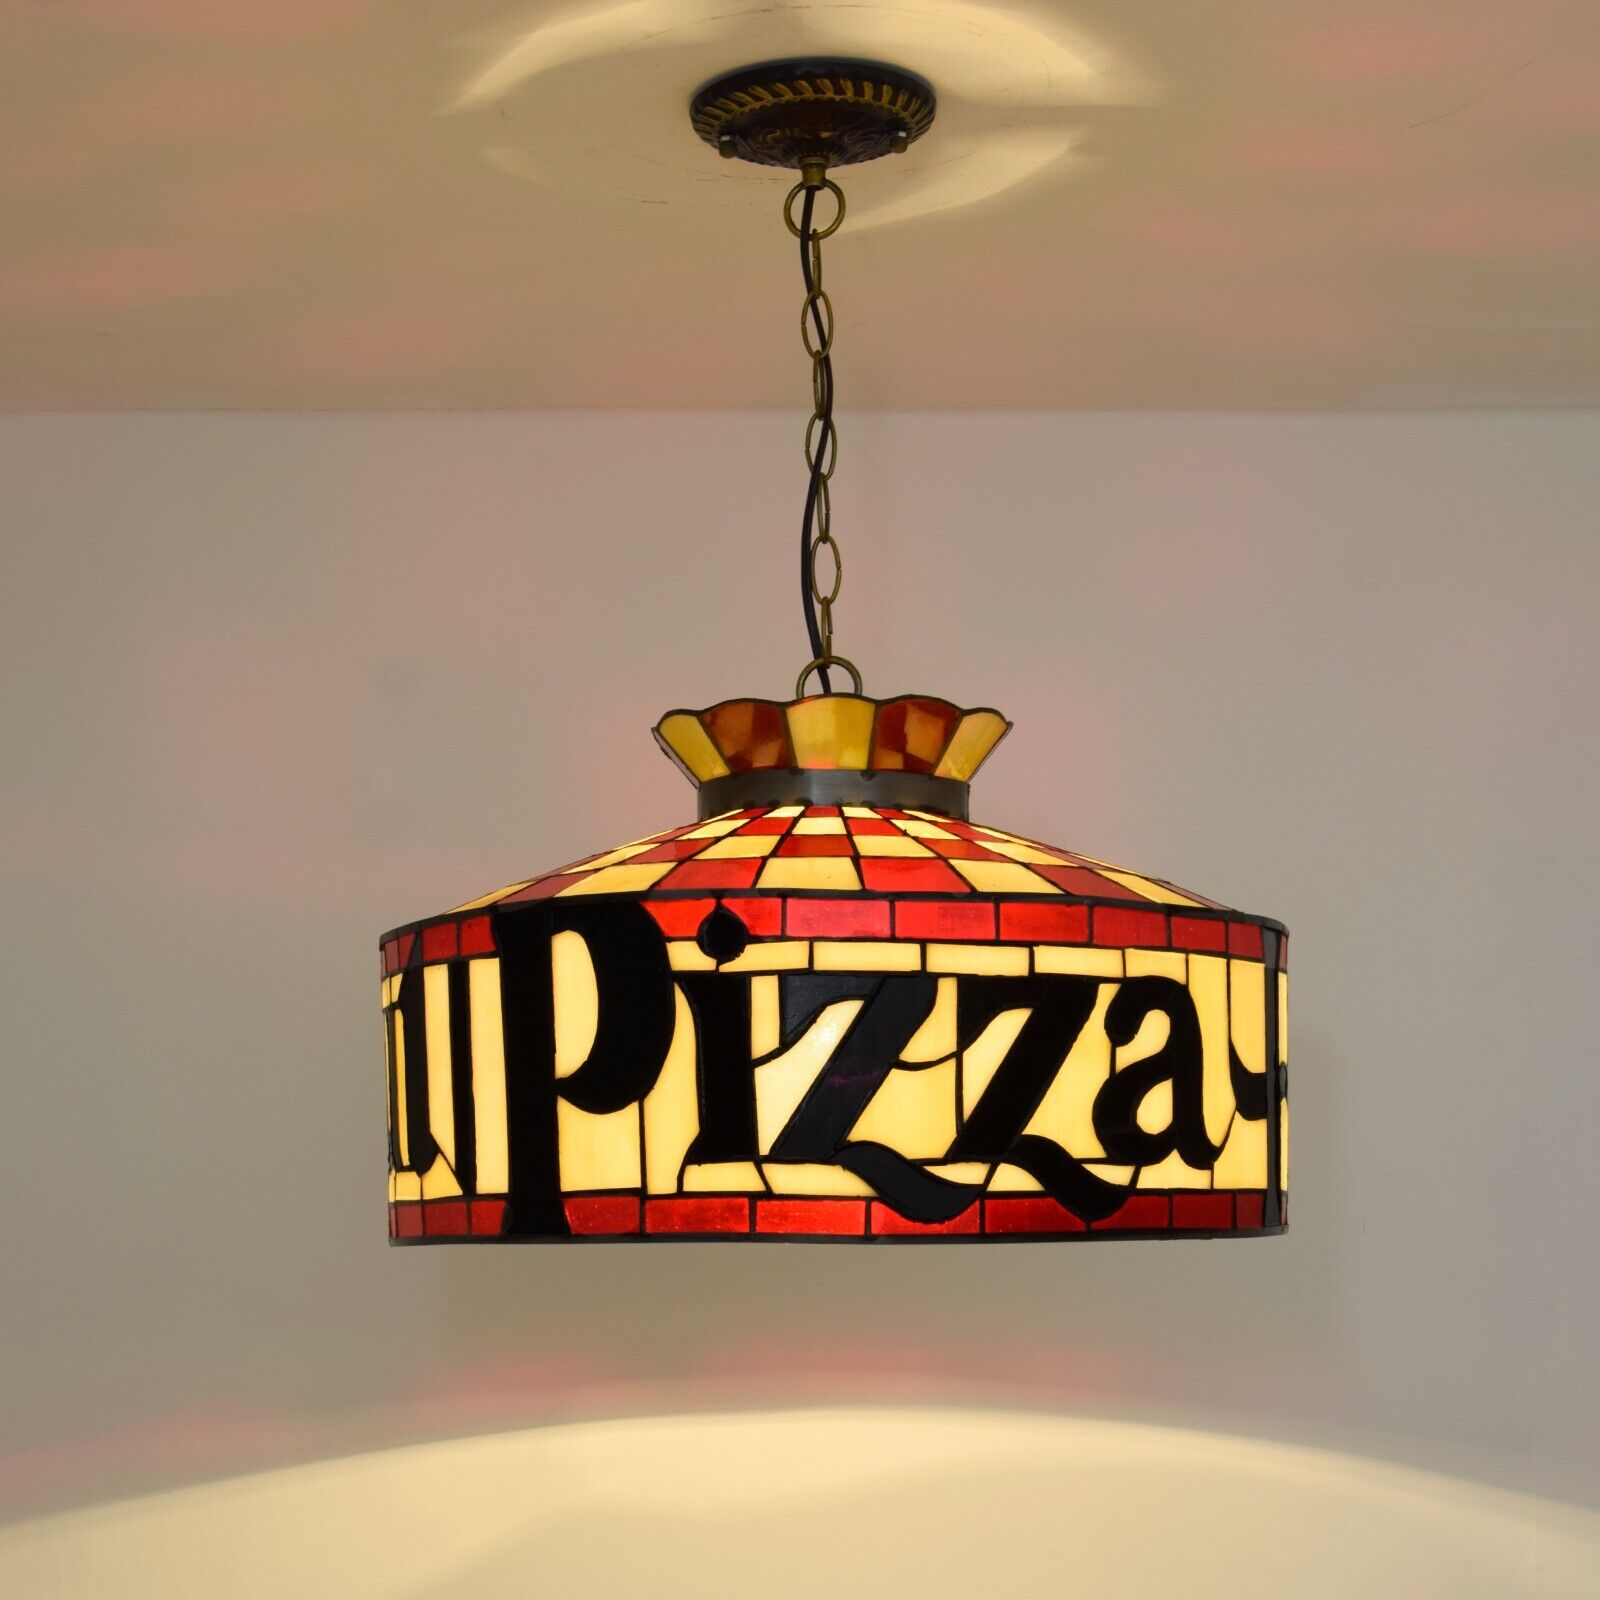 Pizza Hut Lamp Full-Size Light - Ships Today from USA